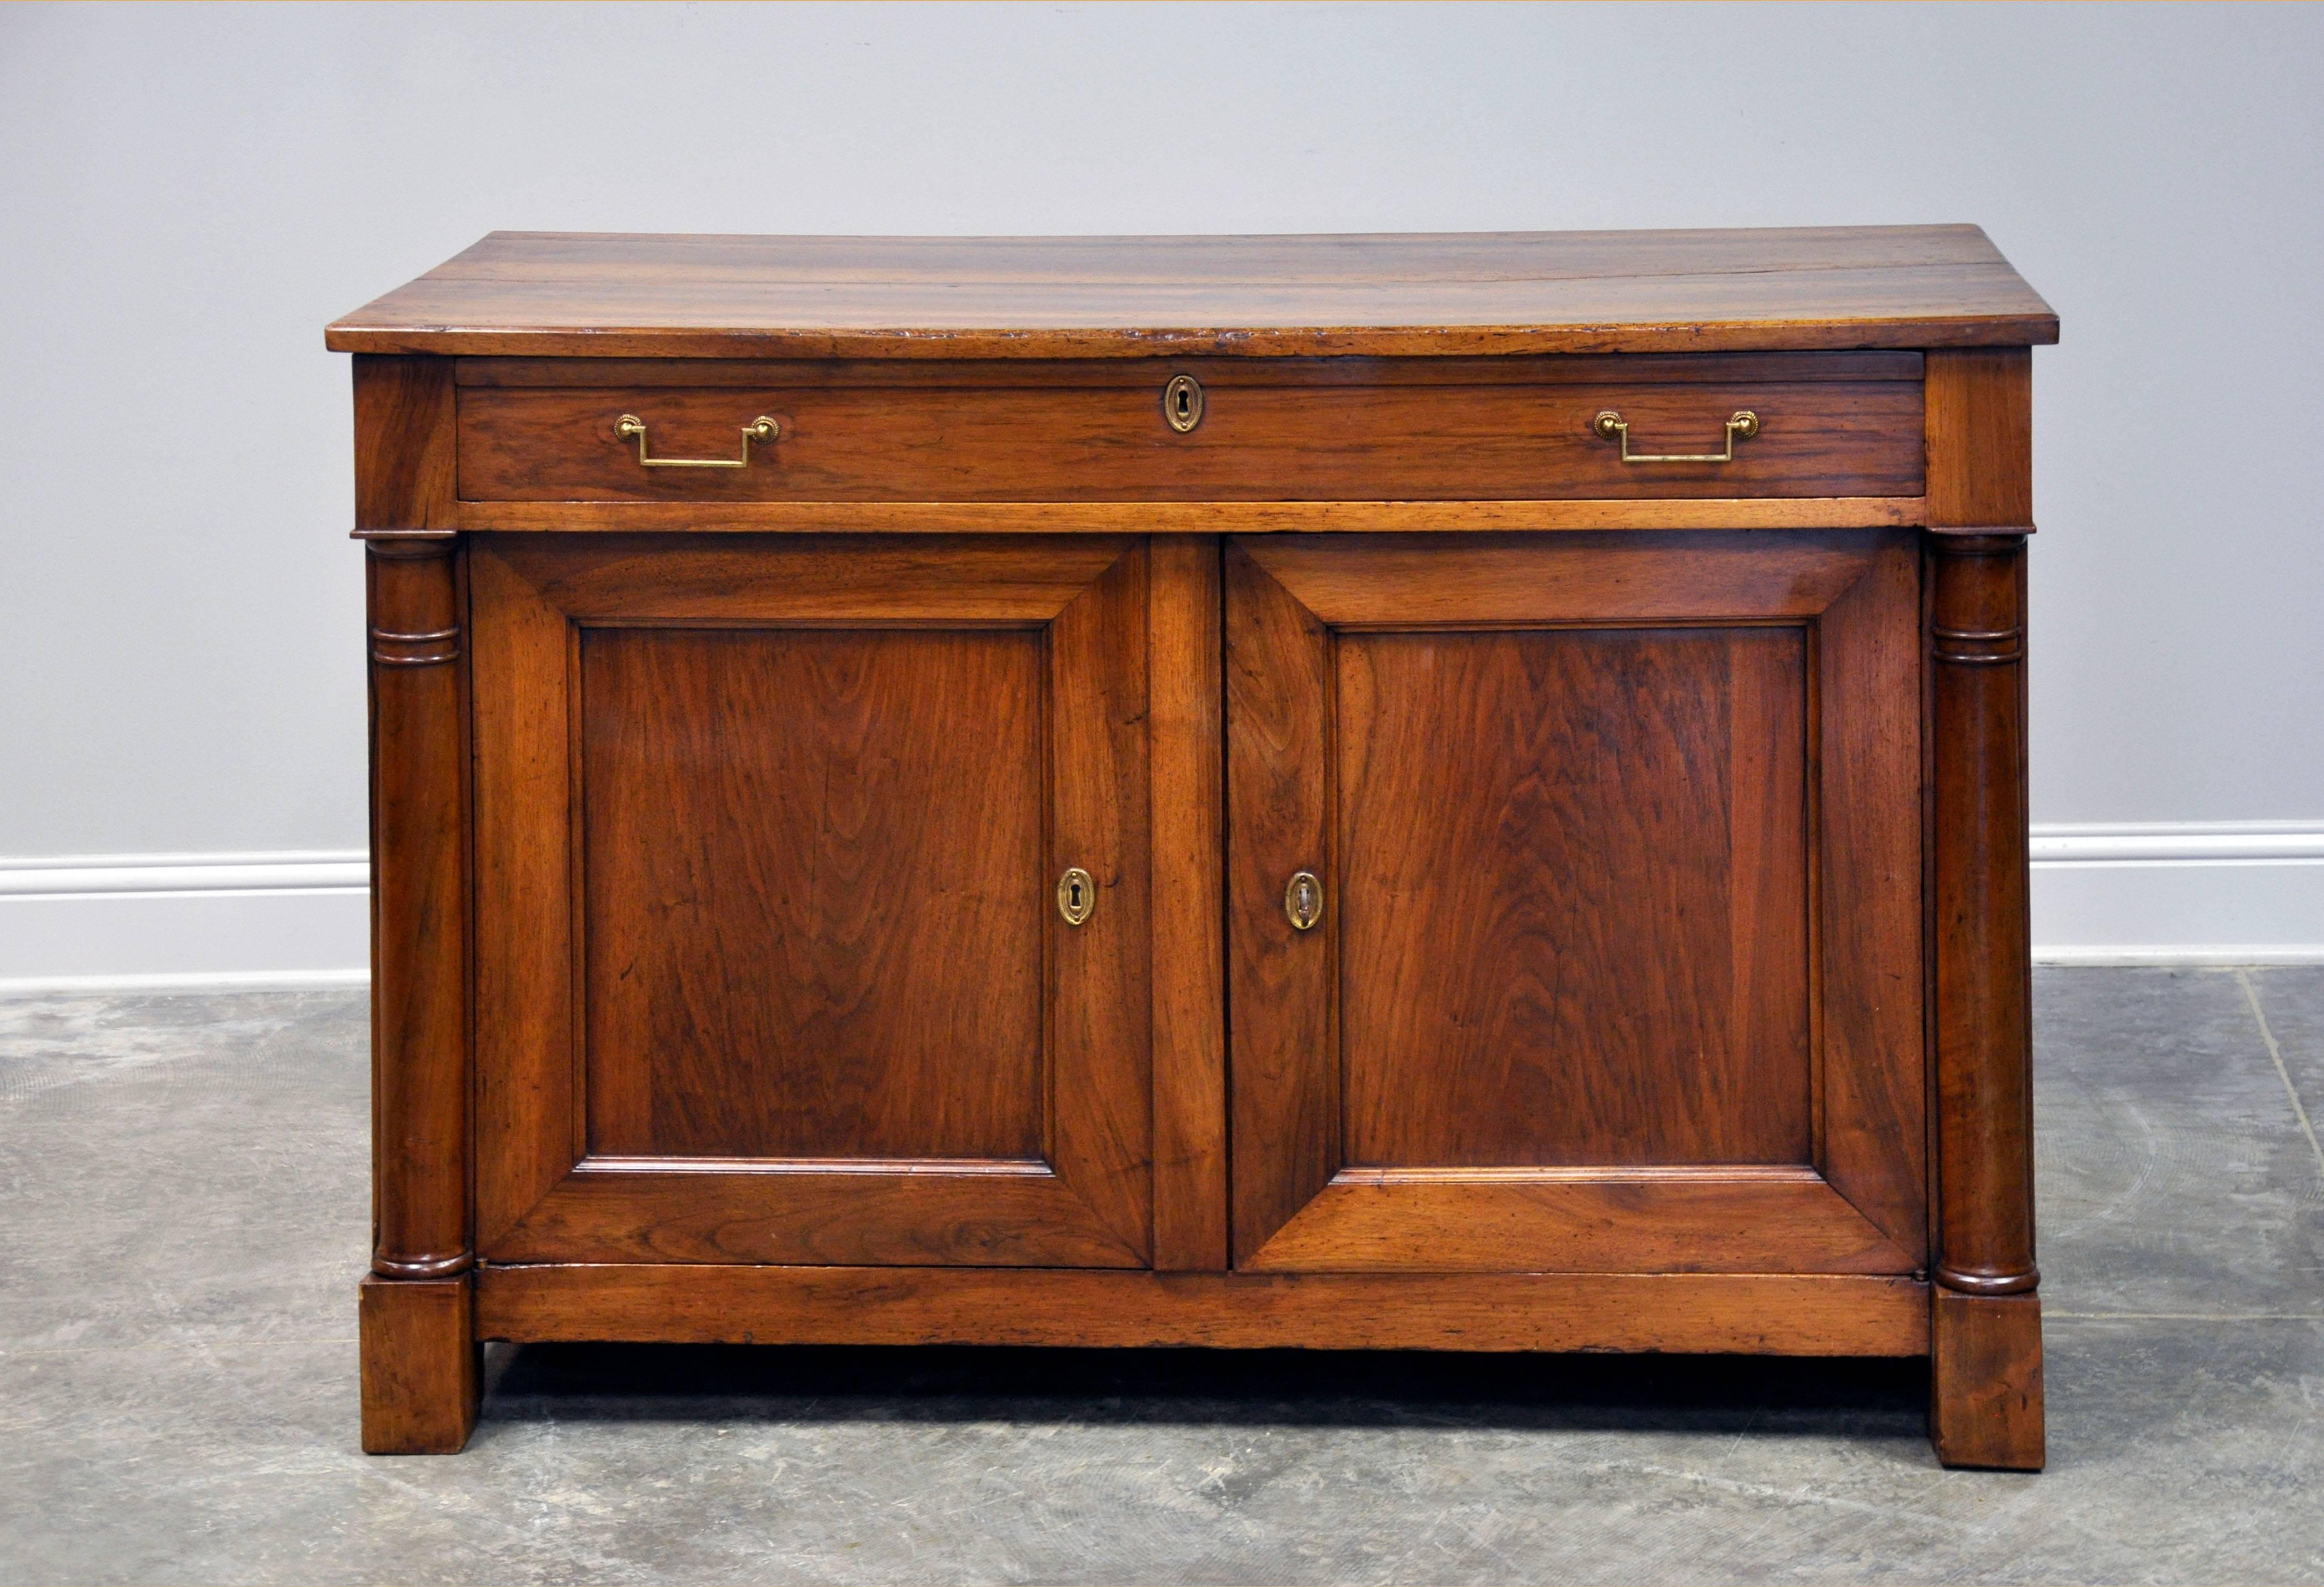 19th century French Empire style buffet in beautiful walnut lends the classic stylings of this case piece both warmth and depth. Carved wood pilasters frame a single drawer set above two cabinet doors complete with original brass escutcheons and